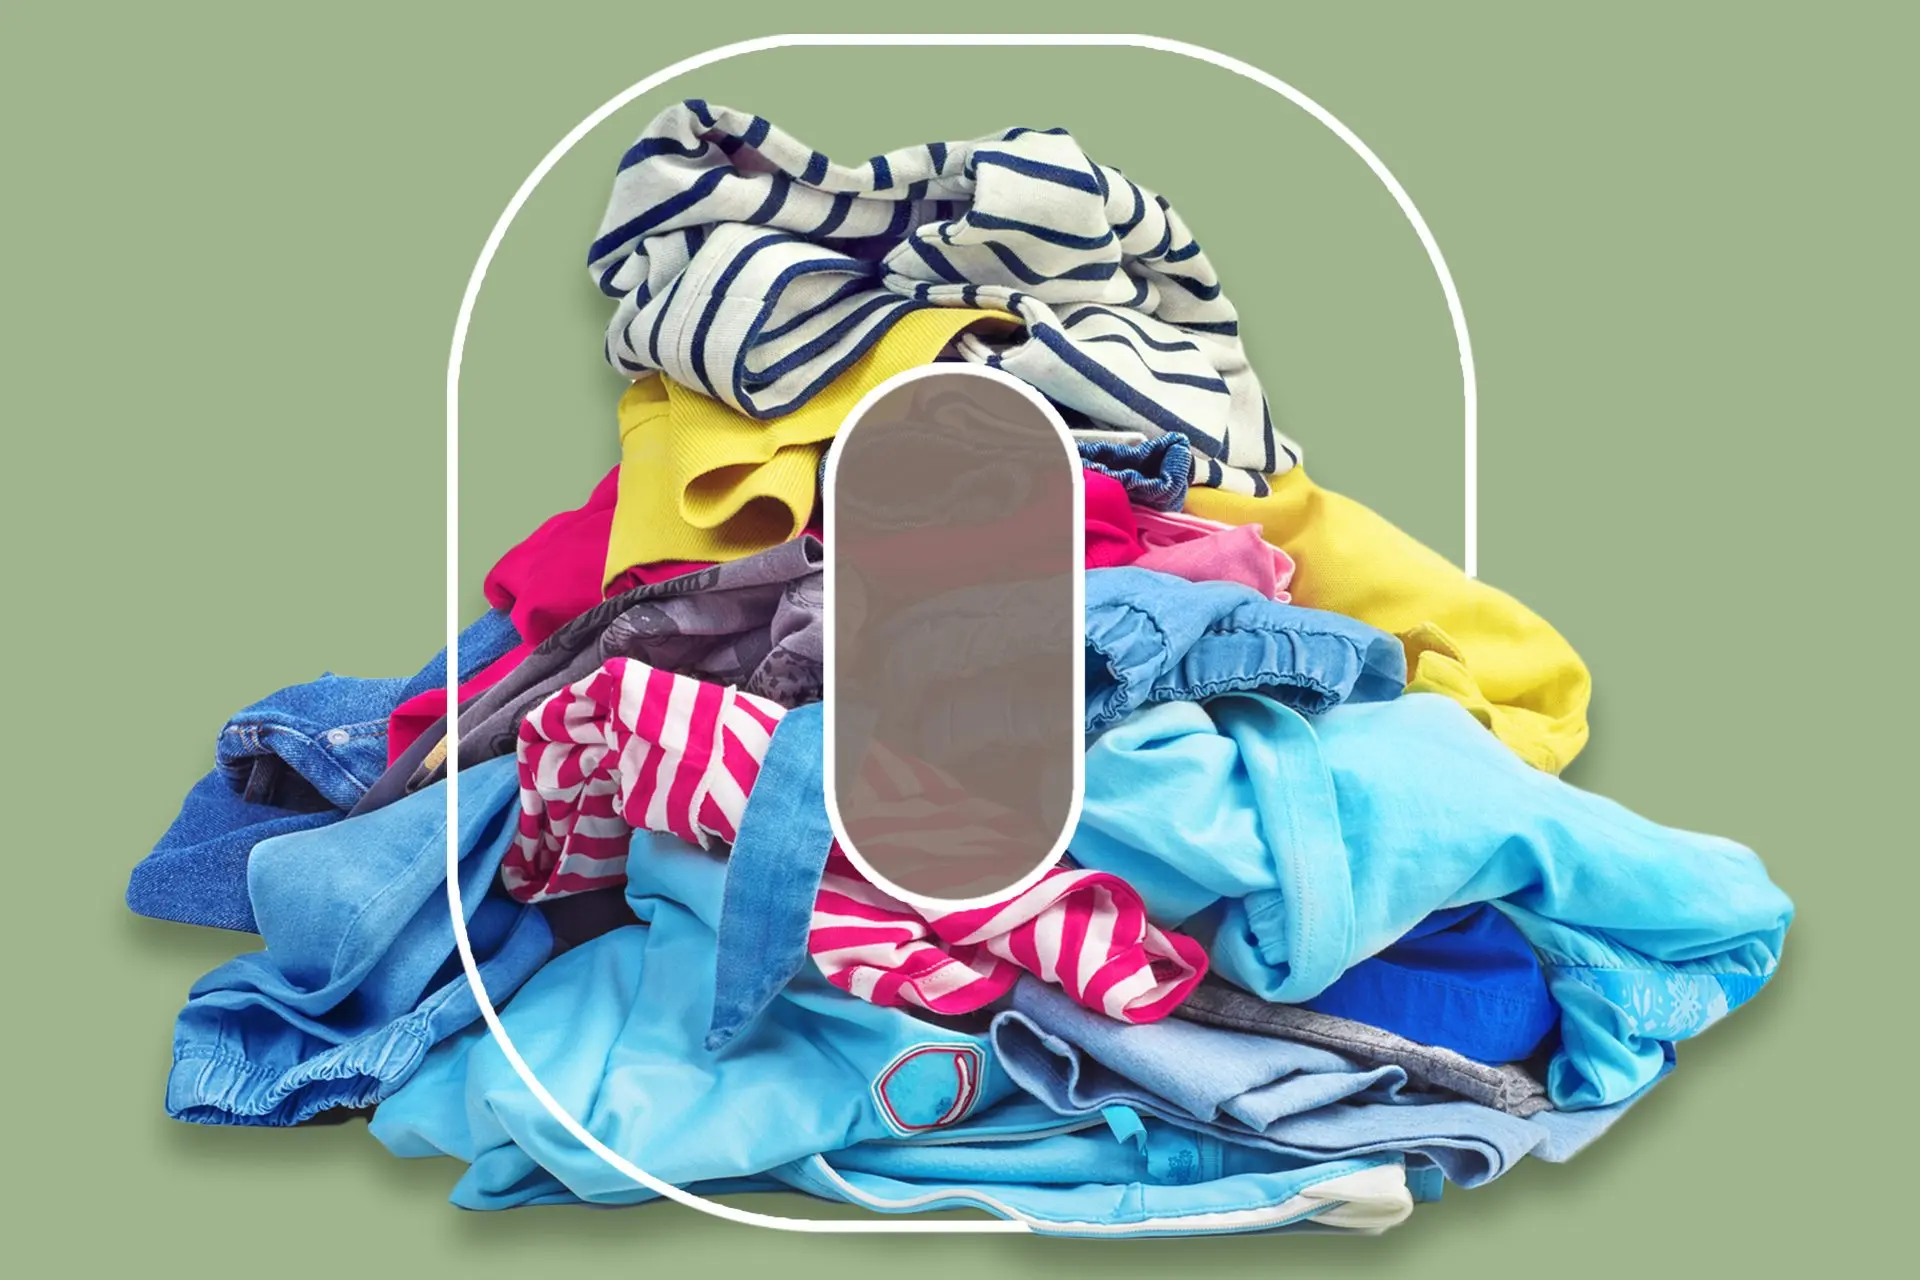 https://environment.co/wp-content/uploads/sites/4/2022/05/Featured-How-You-Can-Recycle-Clothes.jpg.webp